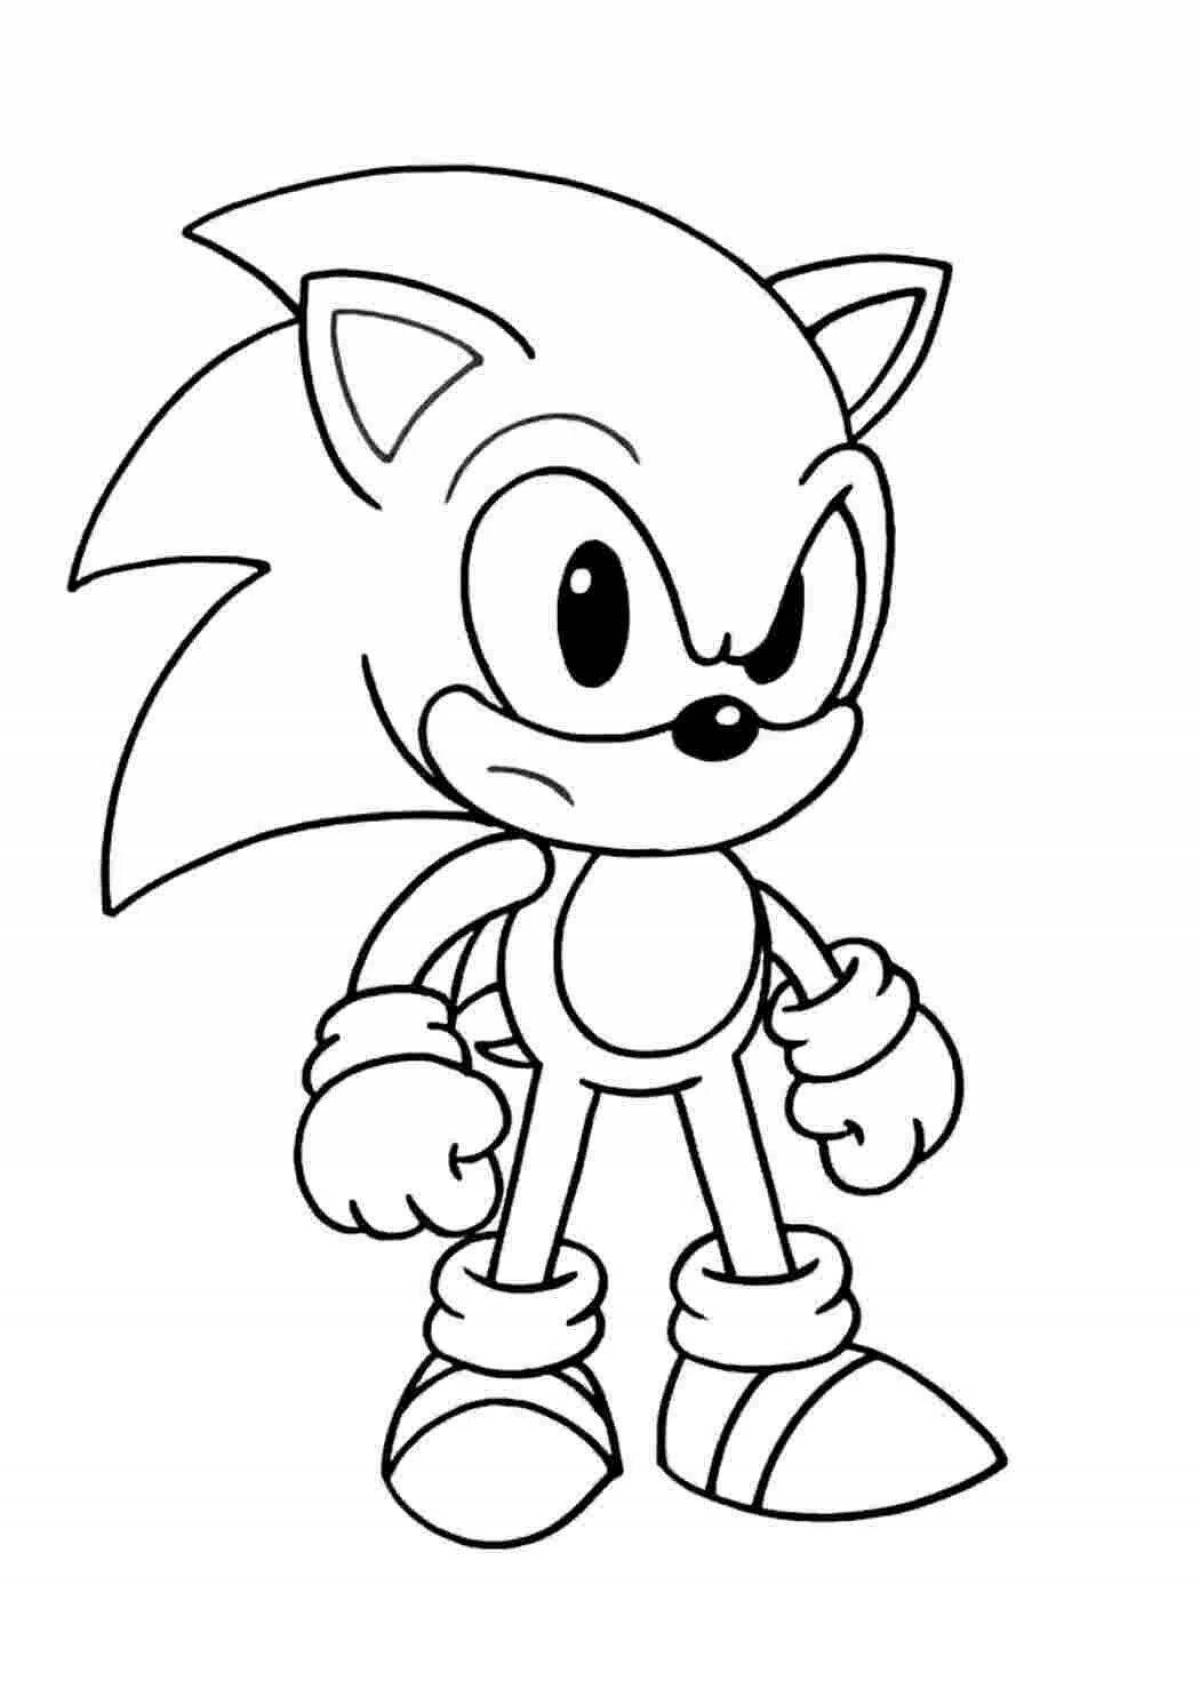 Evil sonic coloring page - frightening